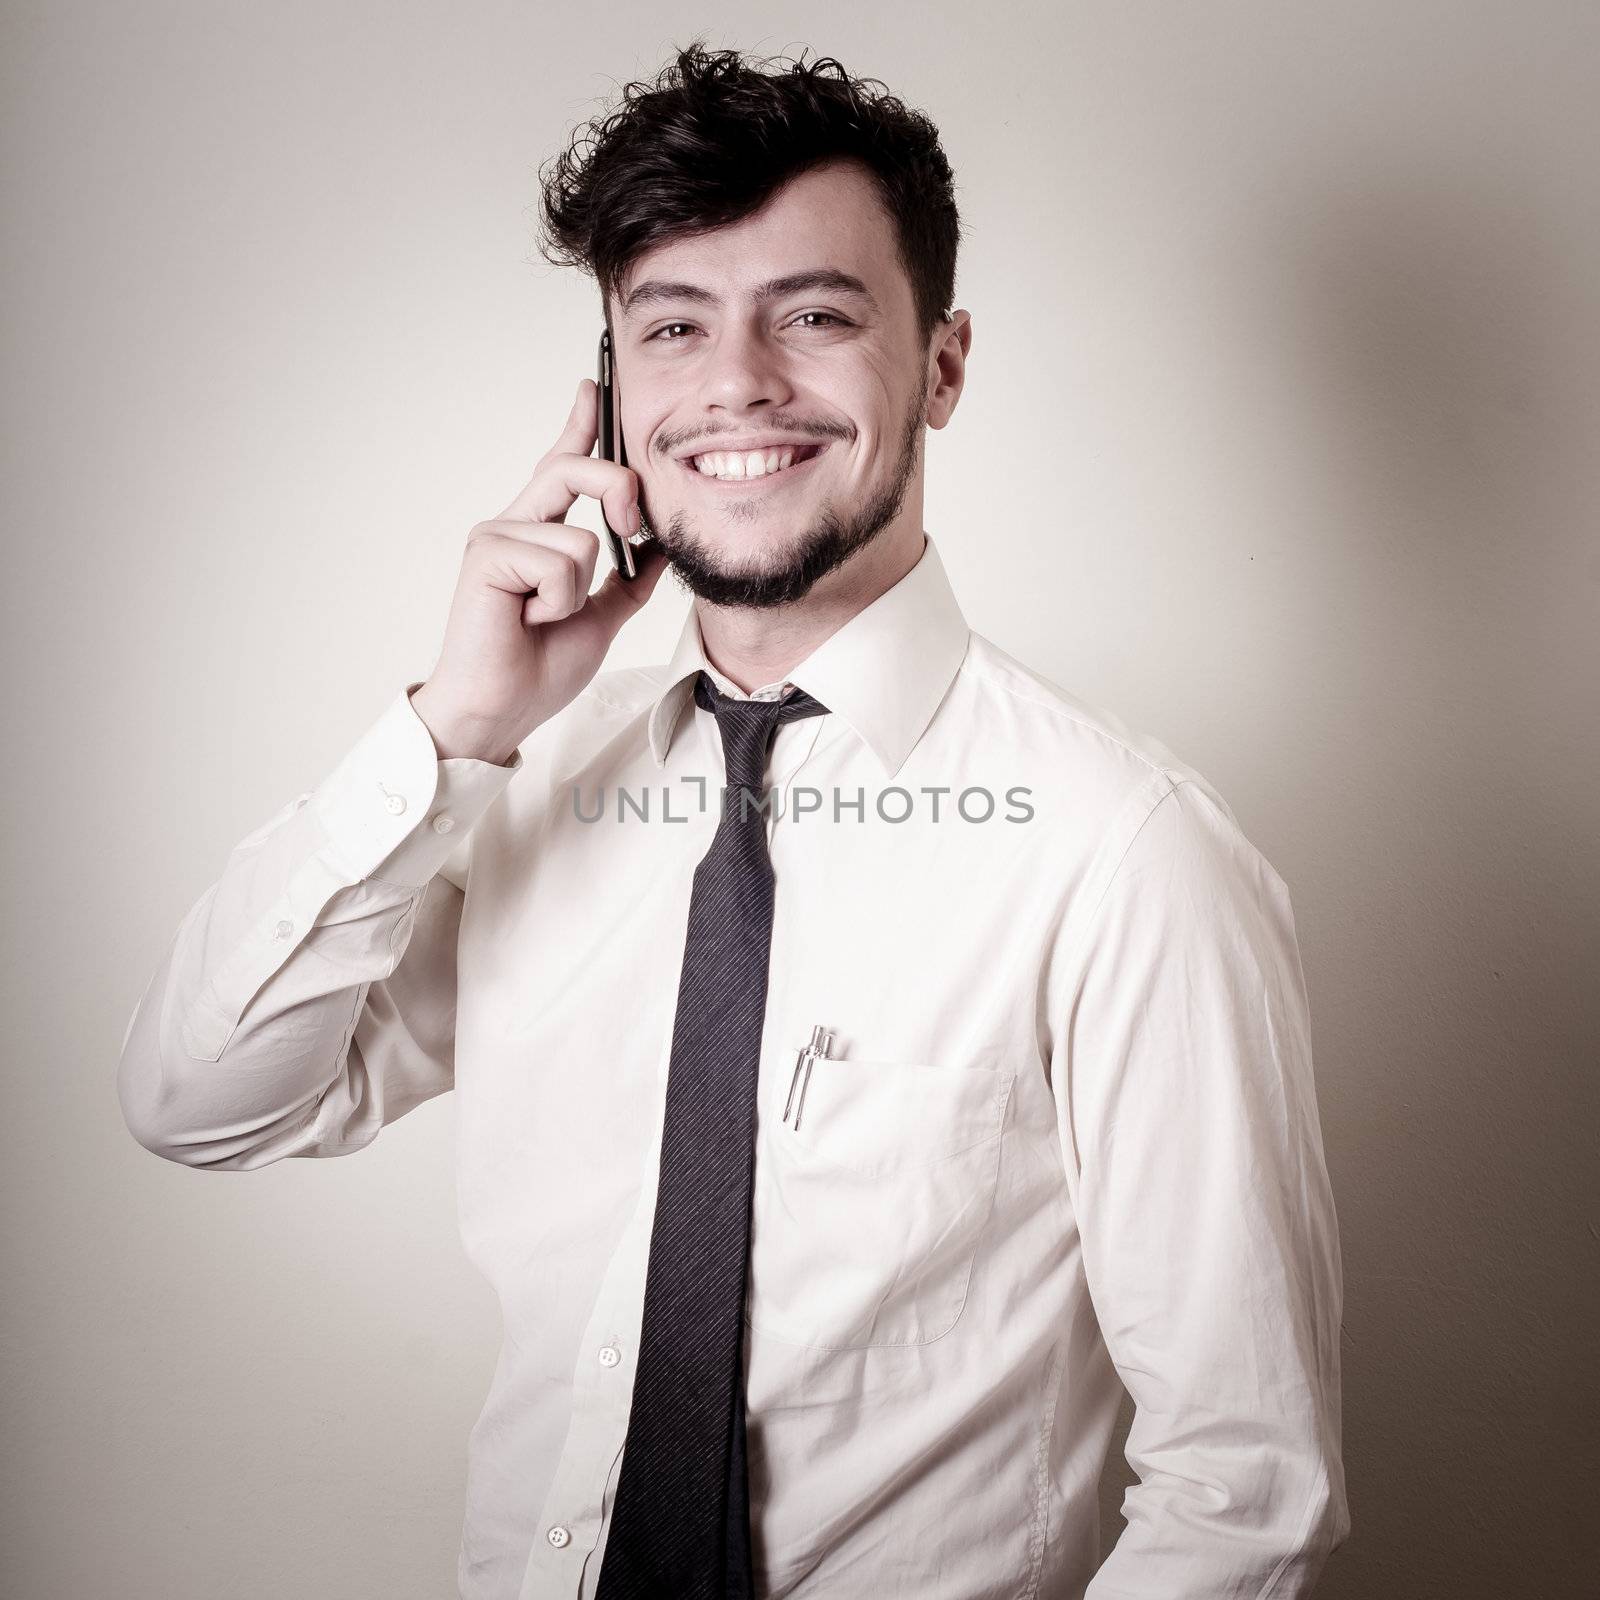 stylish business man on the phone on gray background